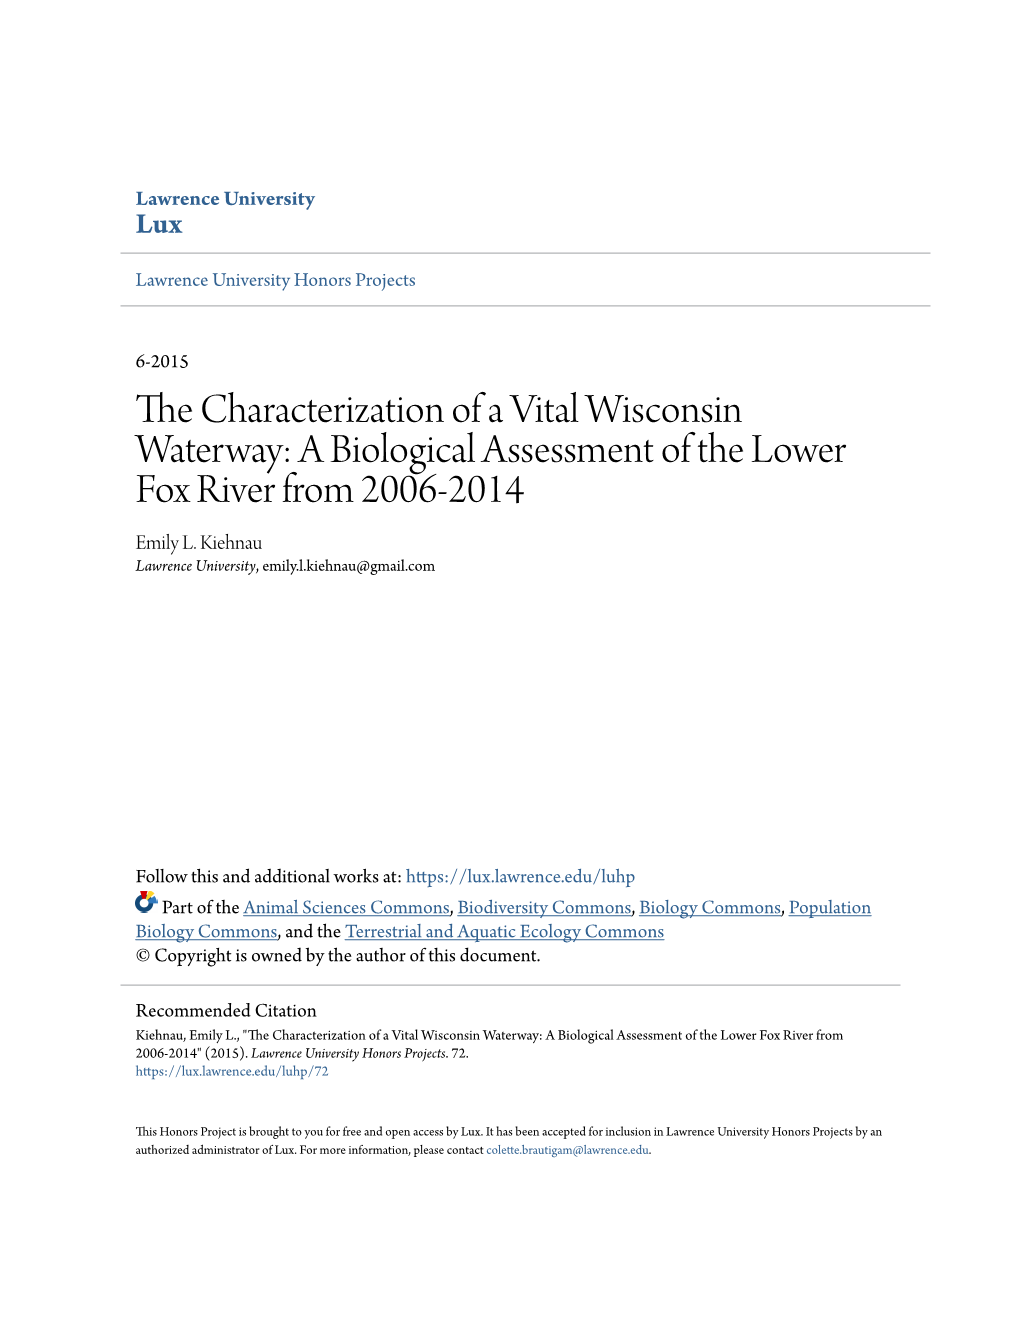 The Characterization of a Vital Wisconsin Waterway: a Biological Assessment of the Lower Fox River from 2006-2014